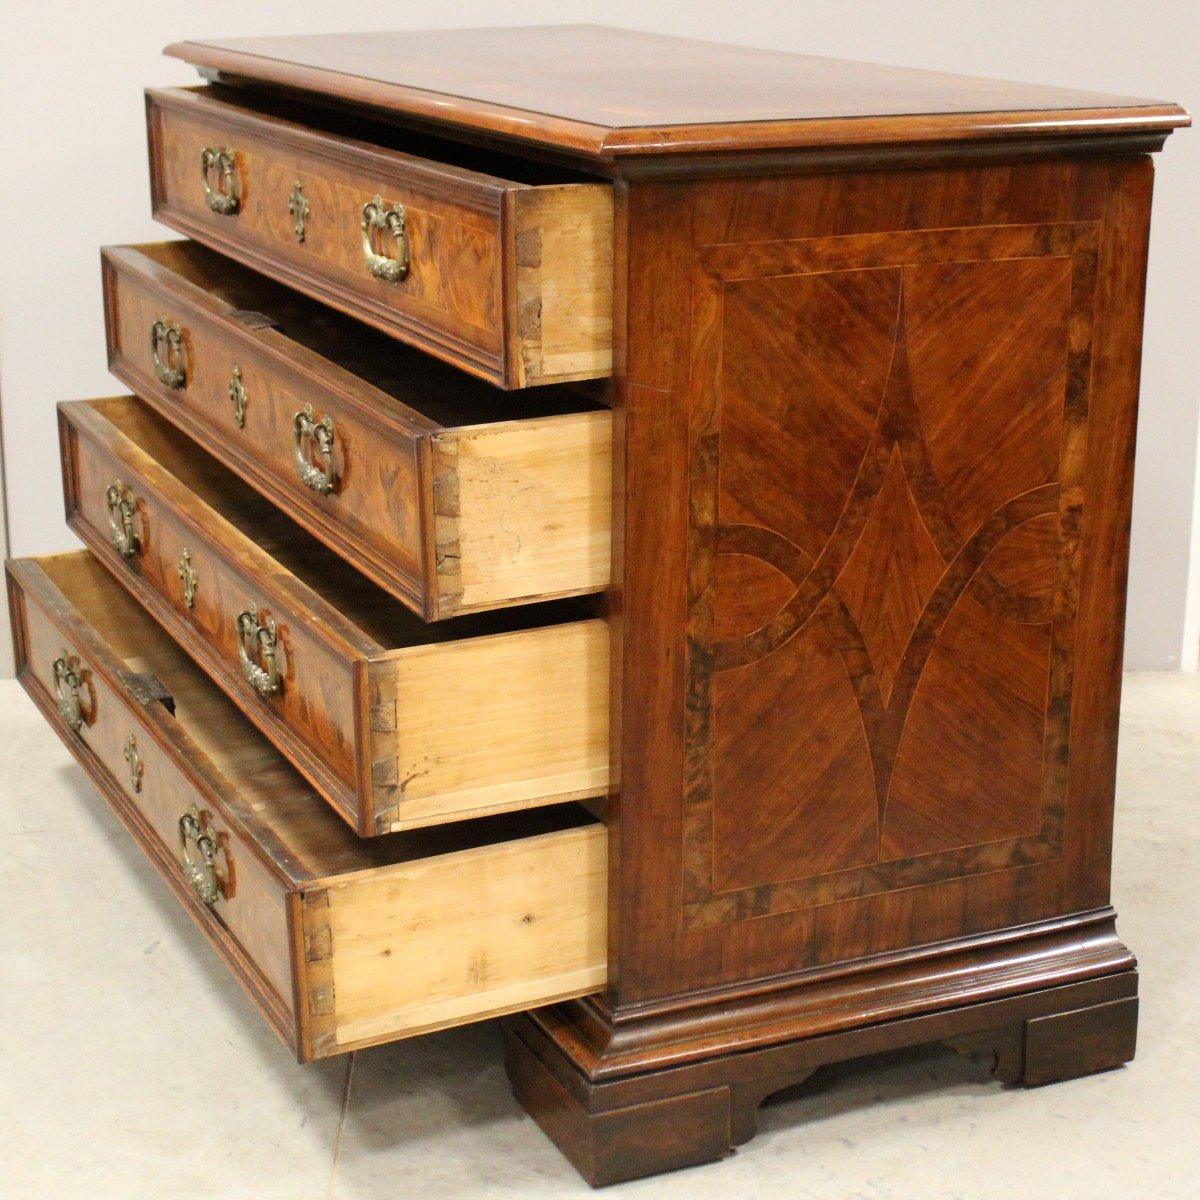 Carved 18th Century Italian Walnut Commode with Four Drawers and Ornate Hardware For Sale